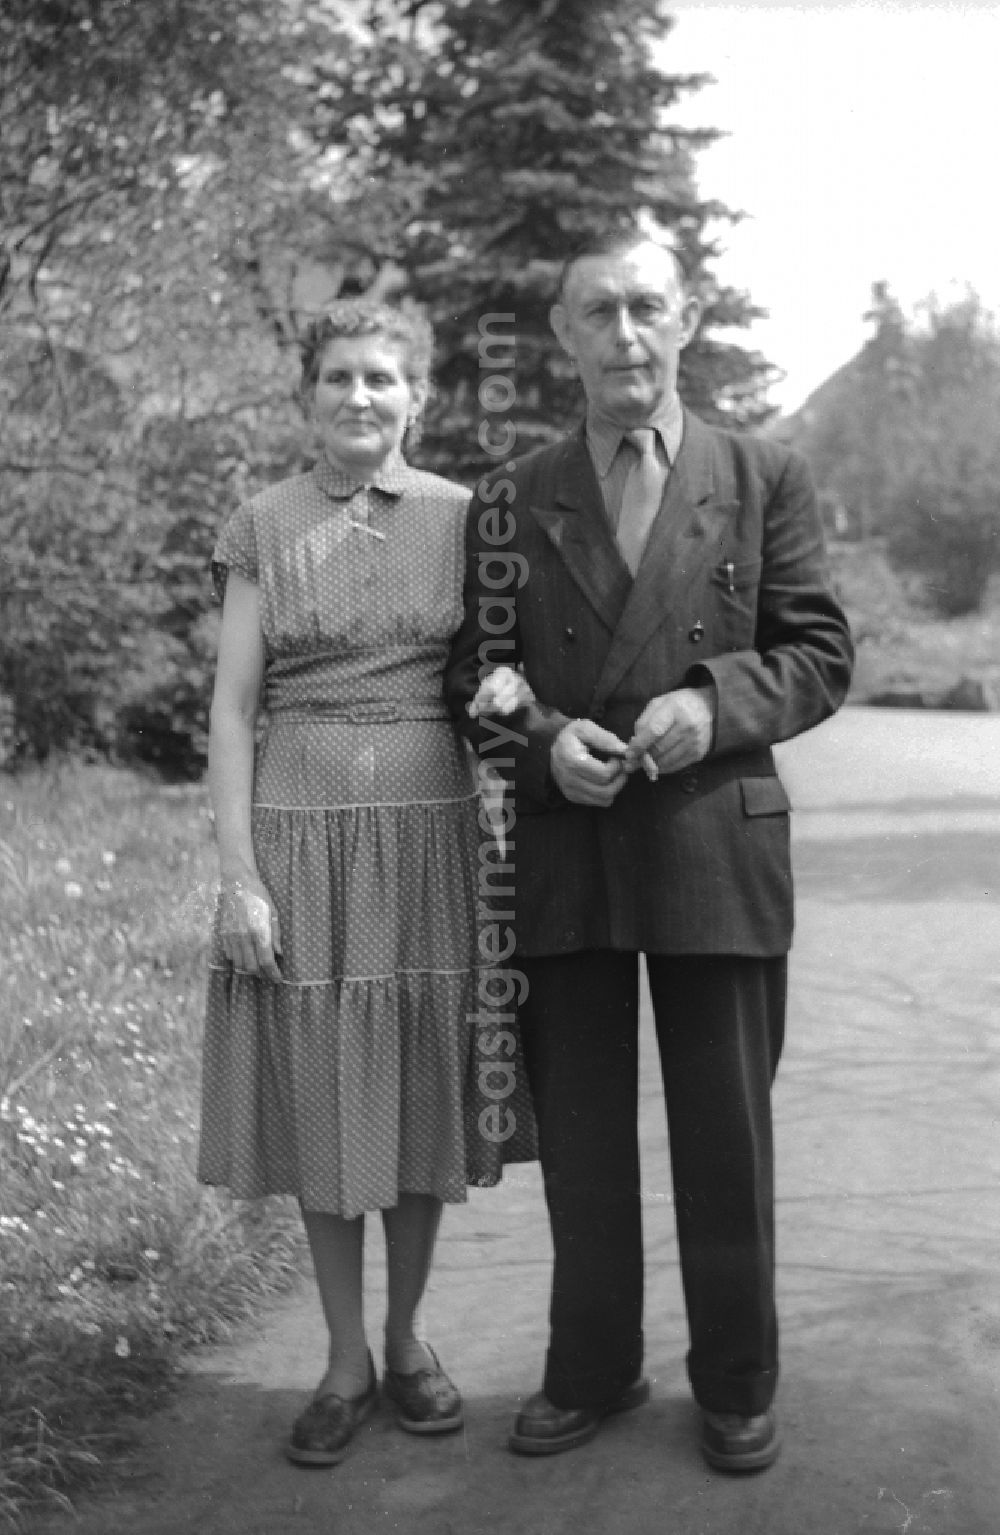 GDR photo archive: Arnstadt - Older married couple in Arnstadt in Thuringia in the area of the German empire, Germany